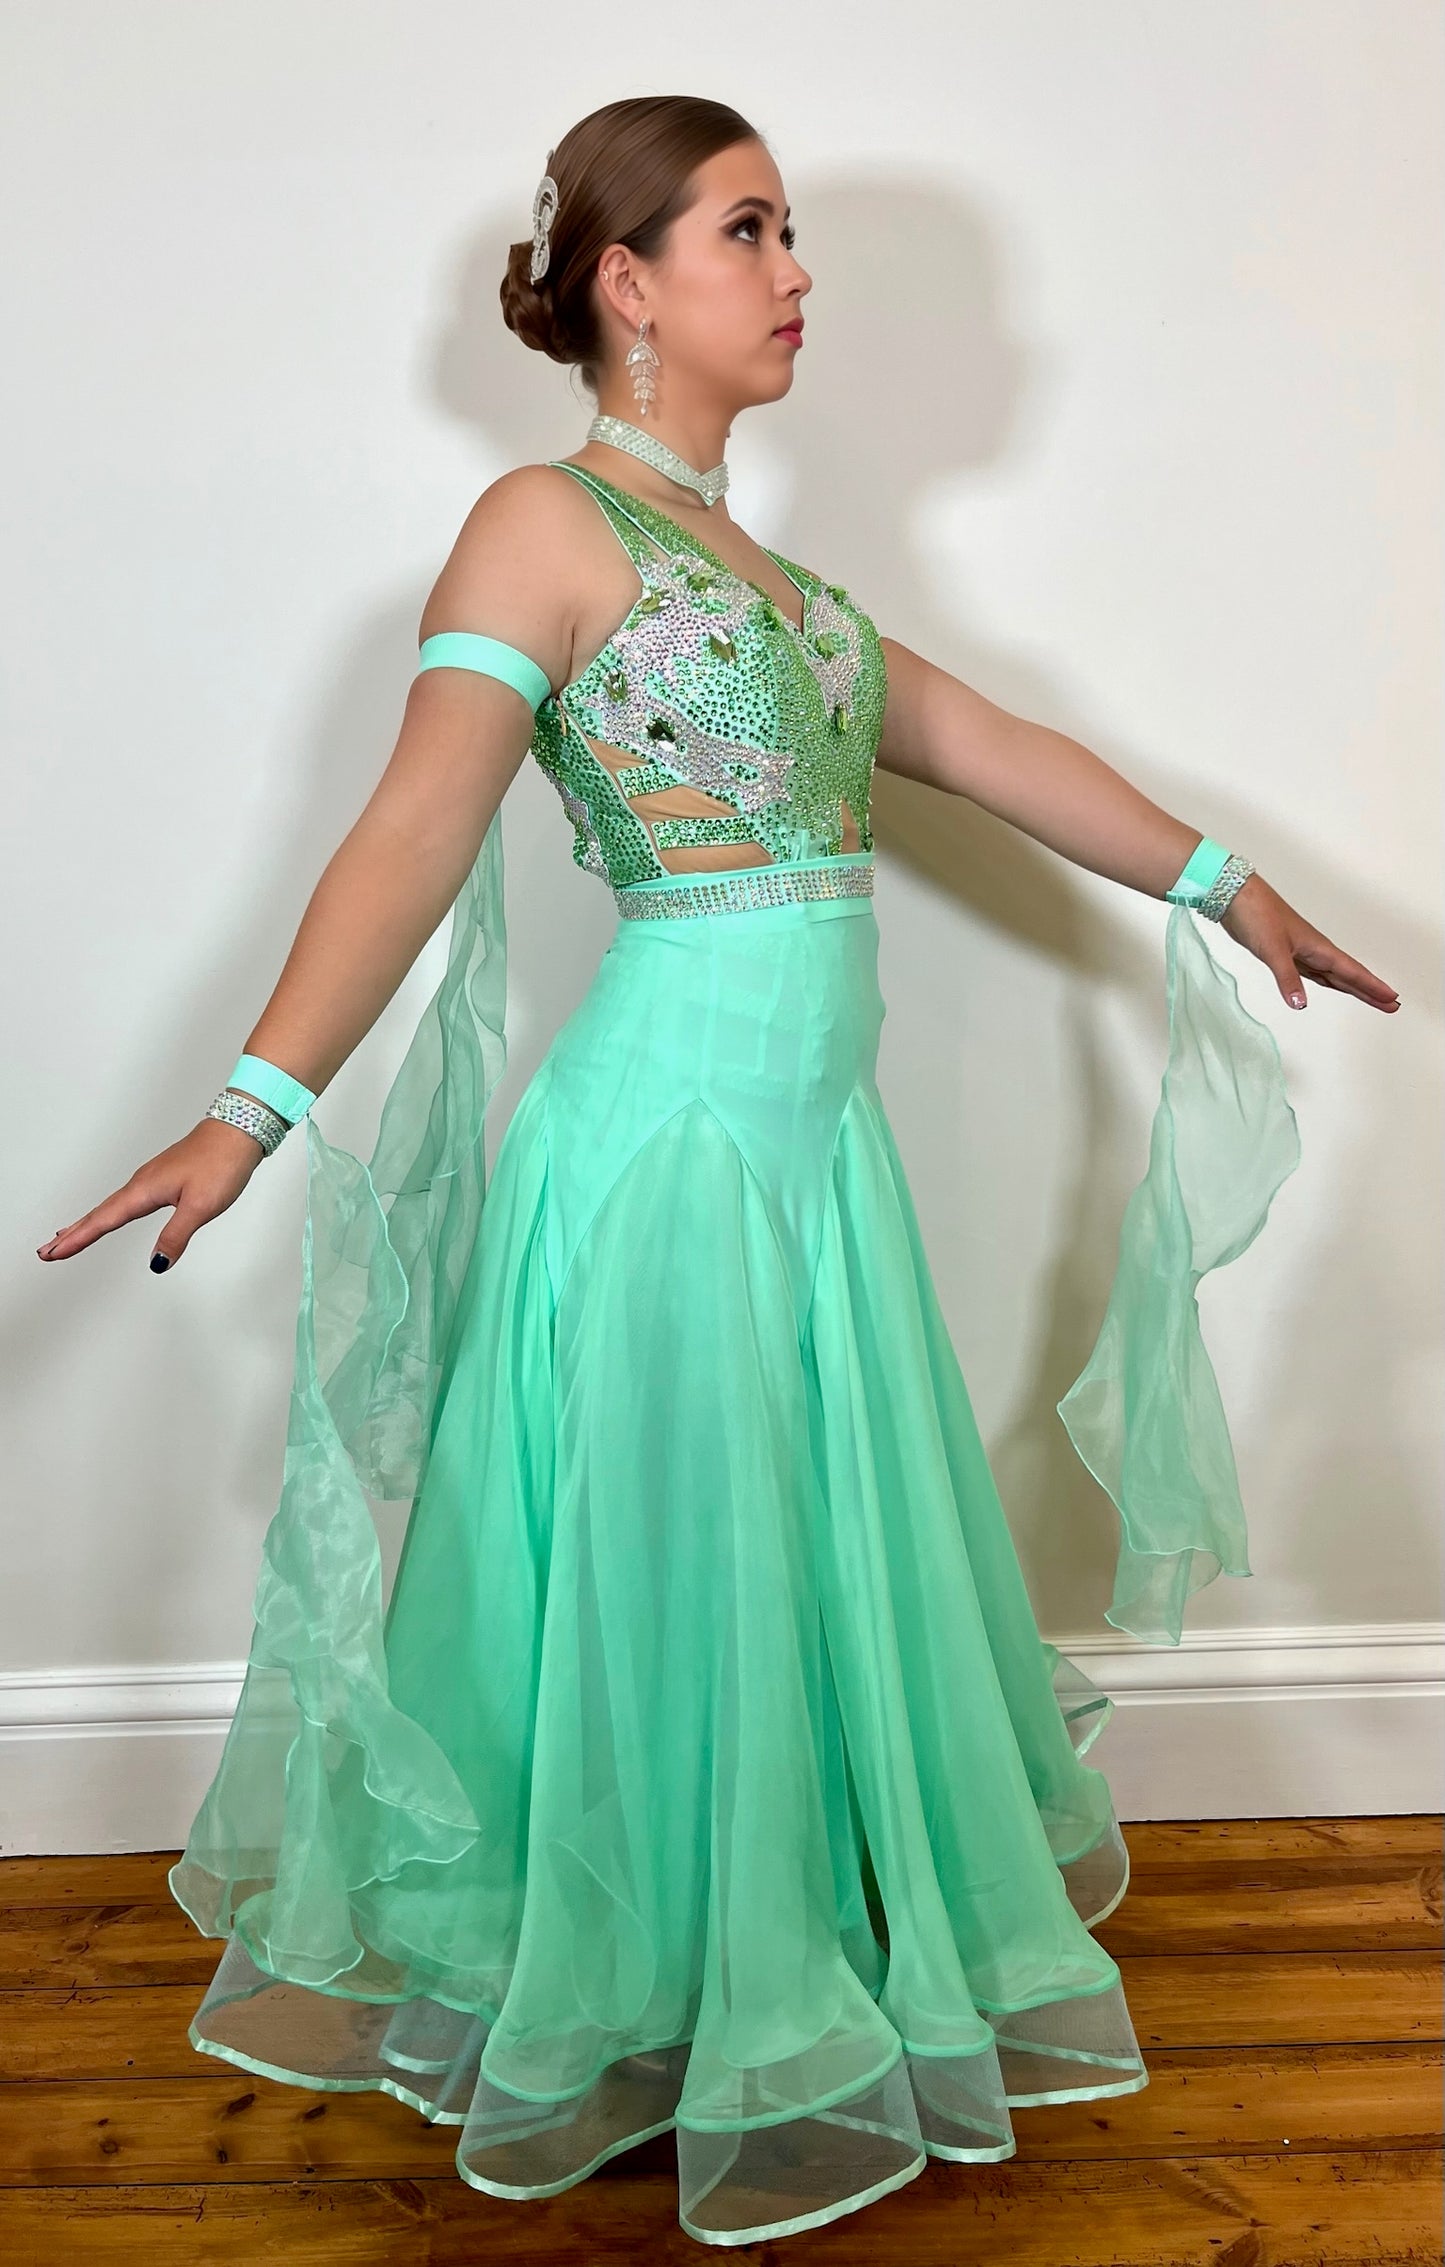 026 Mint Green Latin Dress with a Ballroom Skirt, x4 floats on bands & AB stoned belt. Latin dress with full material fringe, white motifs & stoned in AB